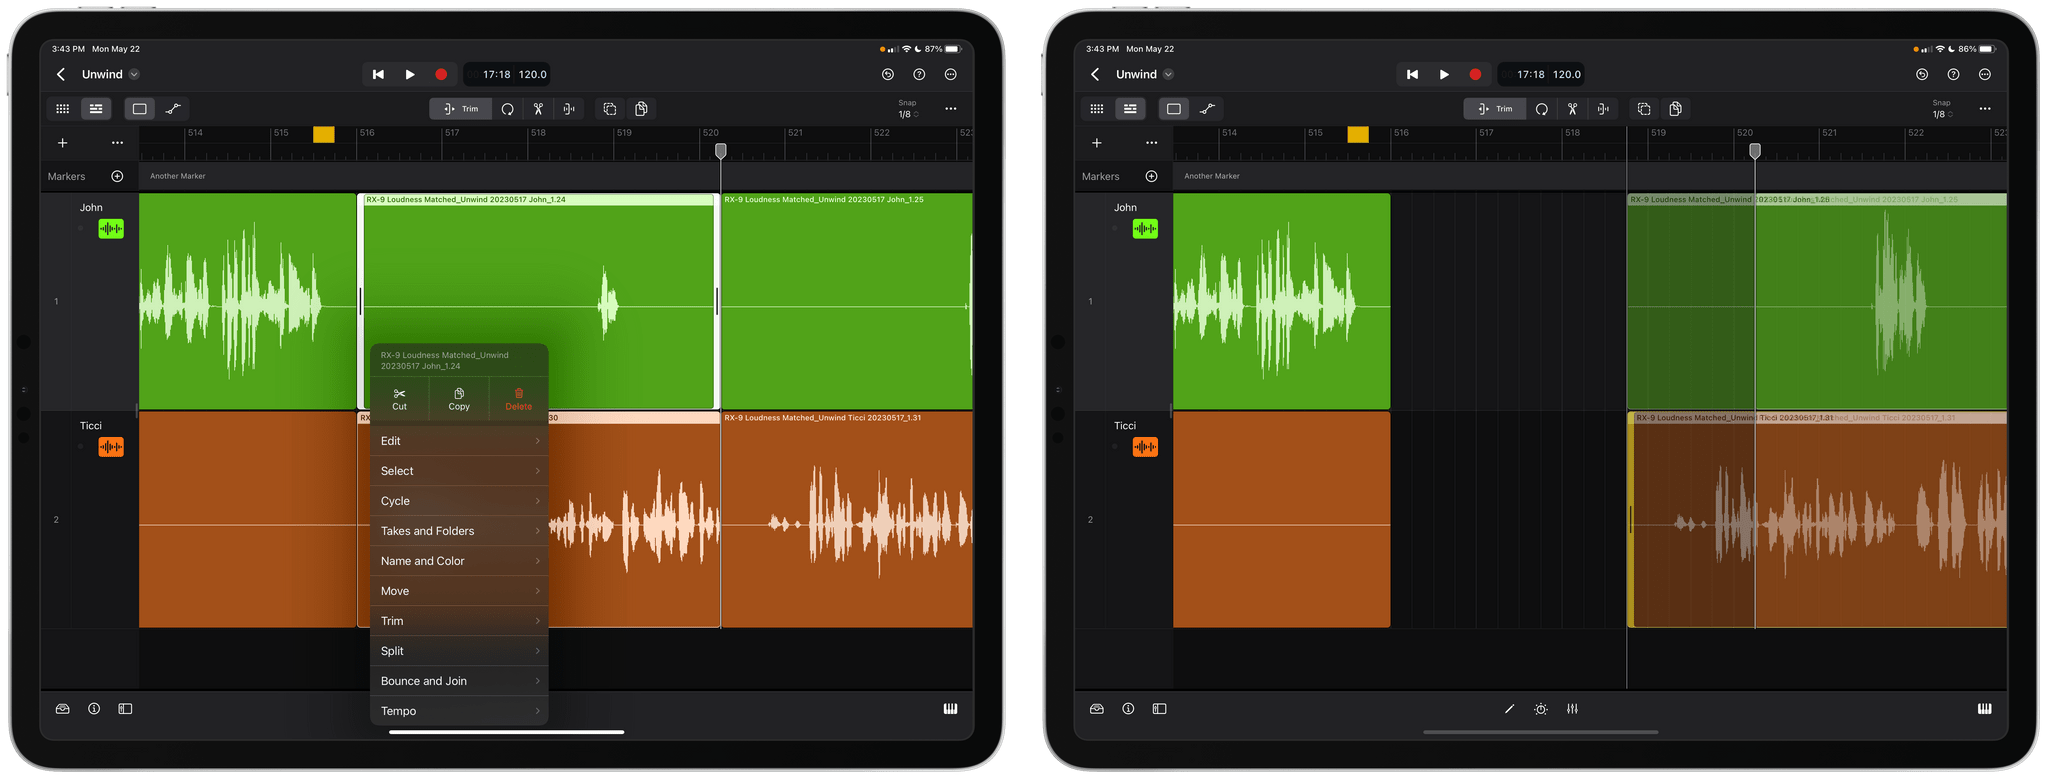 Deleting an audio segment and closing the gap in Trim mode.